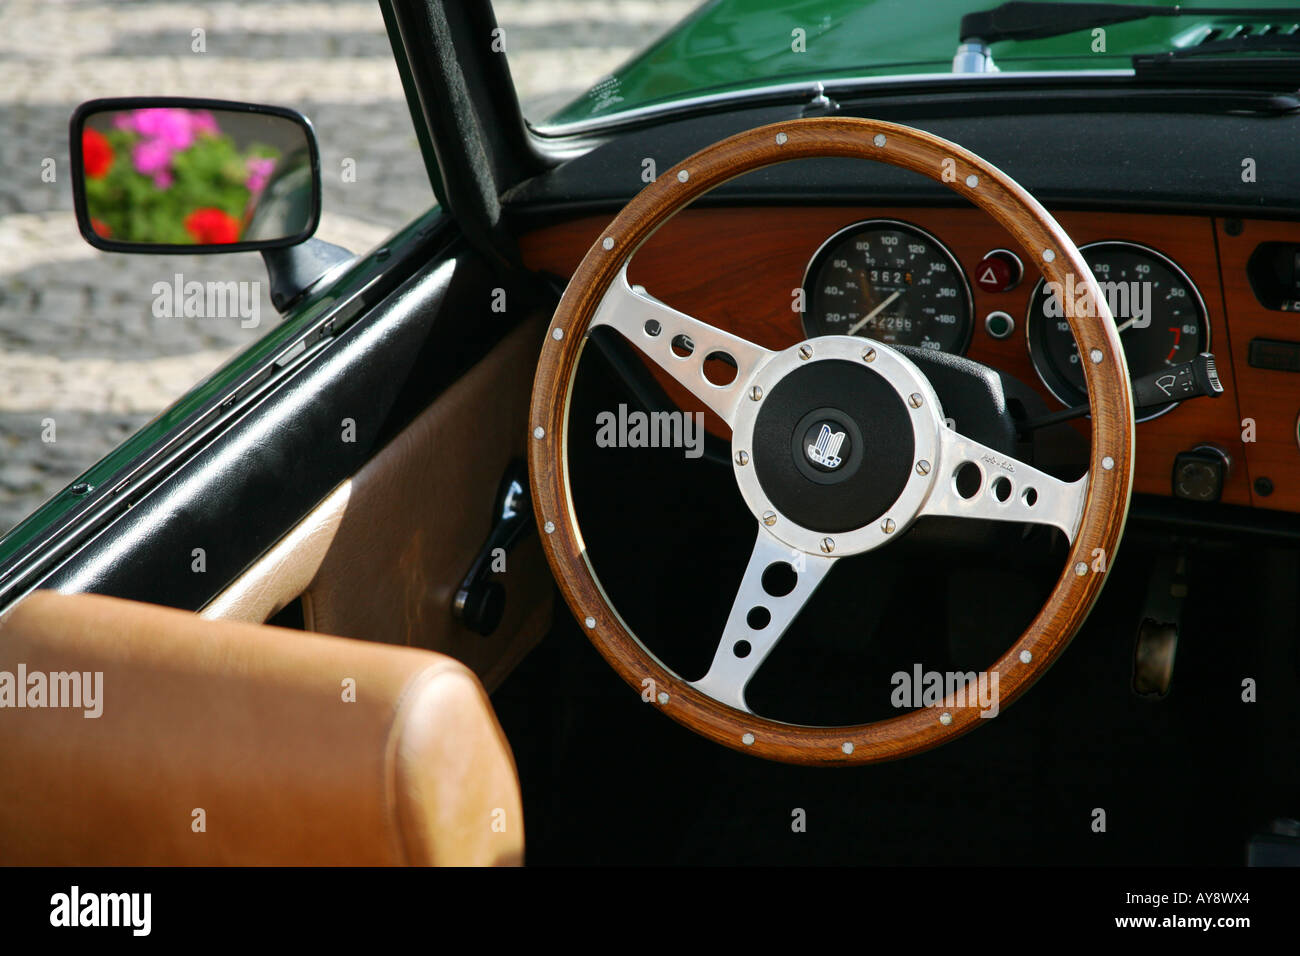 Interior view of a classic car (Triumph Spitfire 500), with flowers showing in the side mirror. Stock Photo